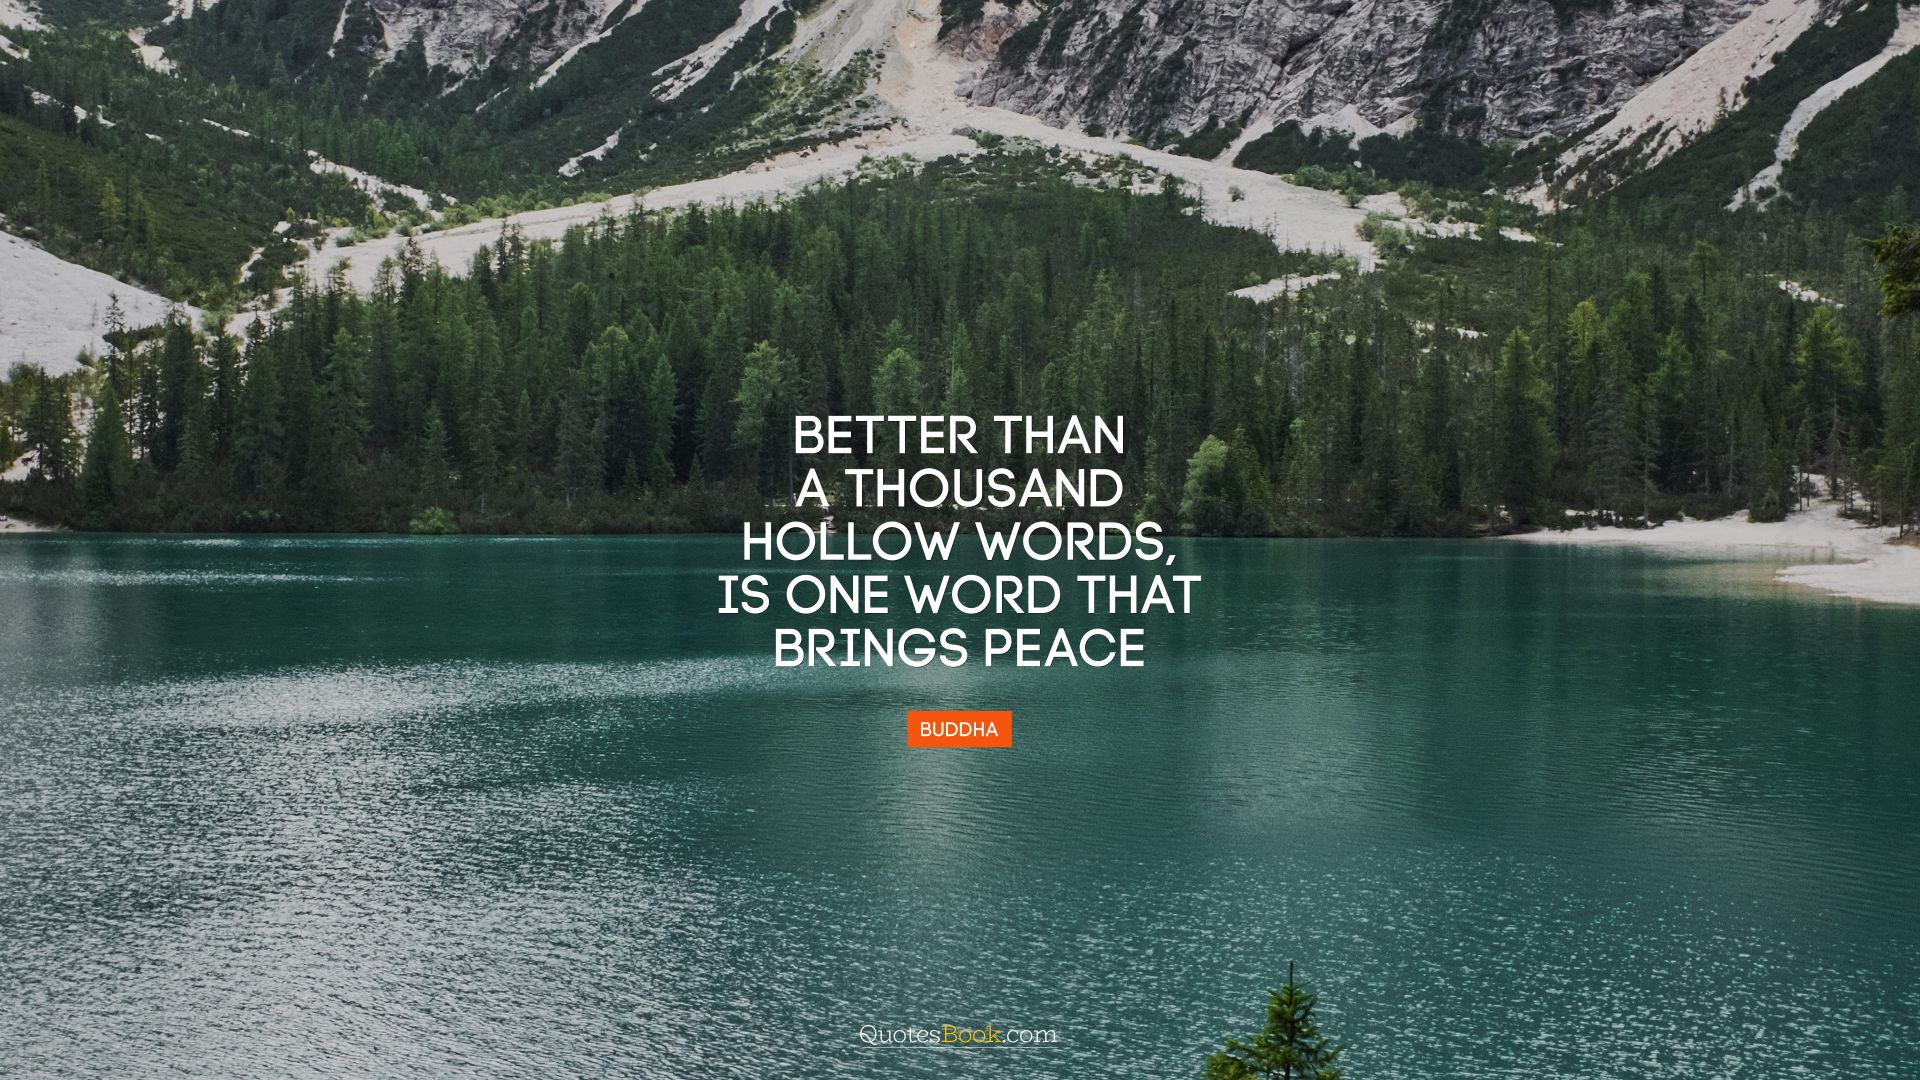 Better than a thousand hollow words, is one word that brings peace. - Quote by Buddha